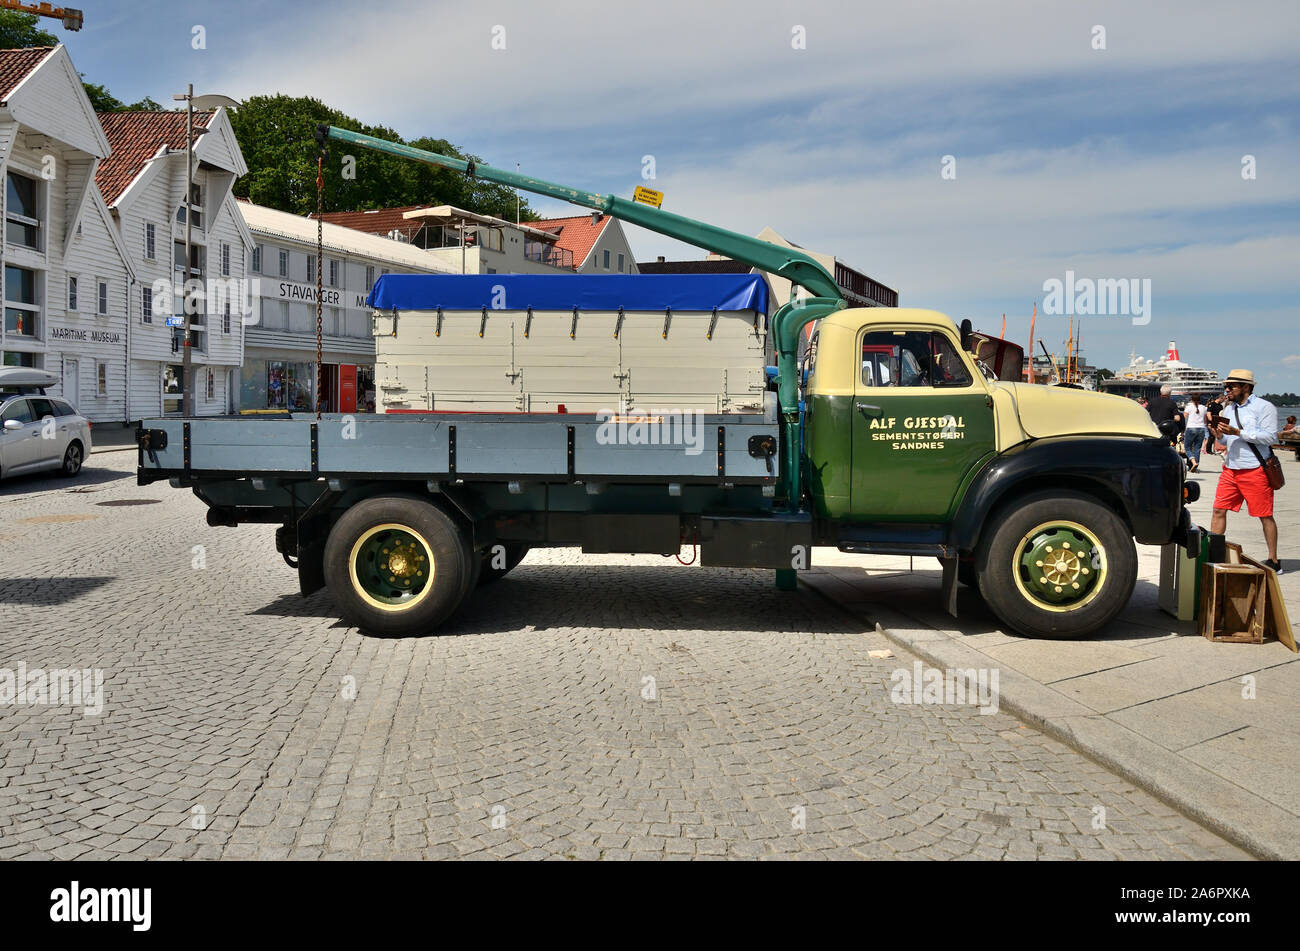 A Bedford Lorry in Stavanger Stock Photo